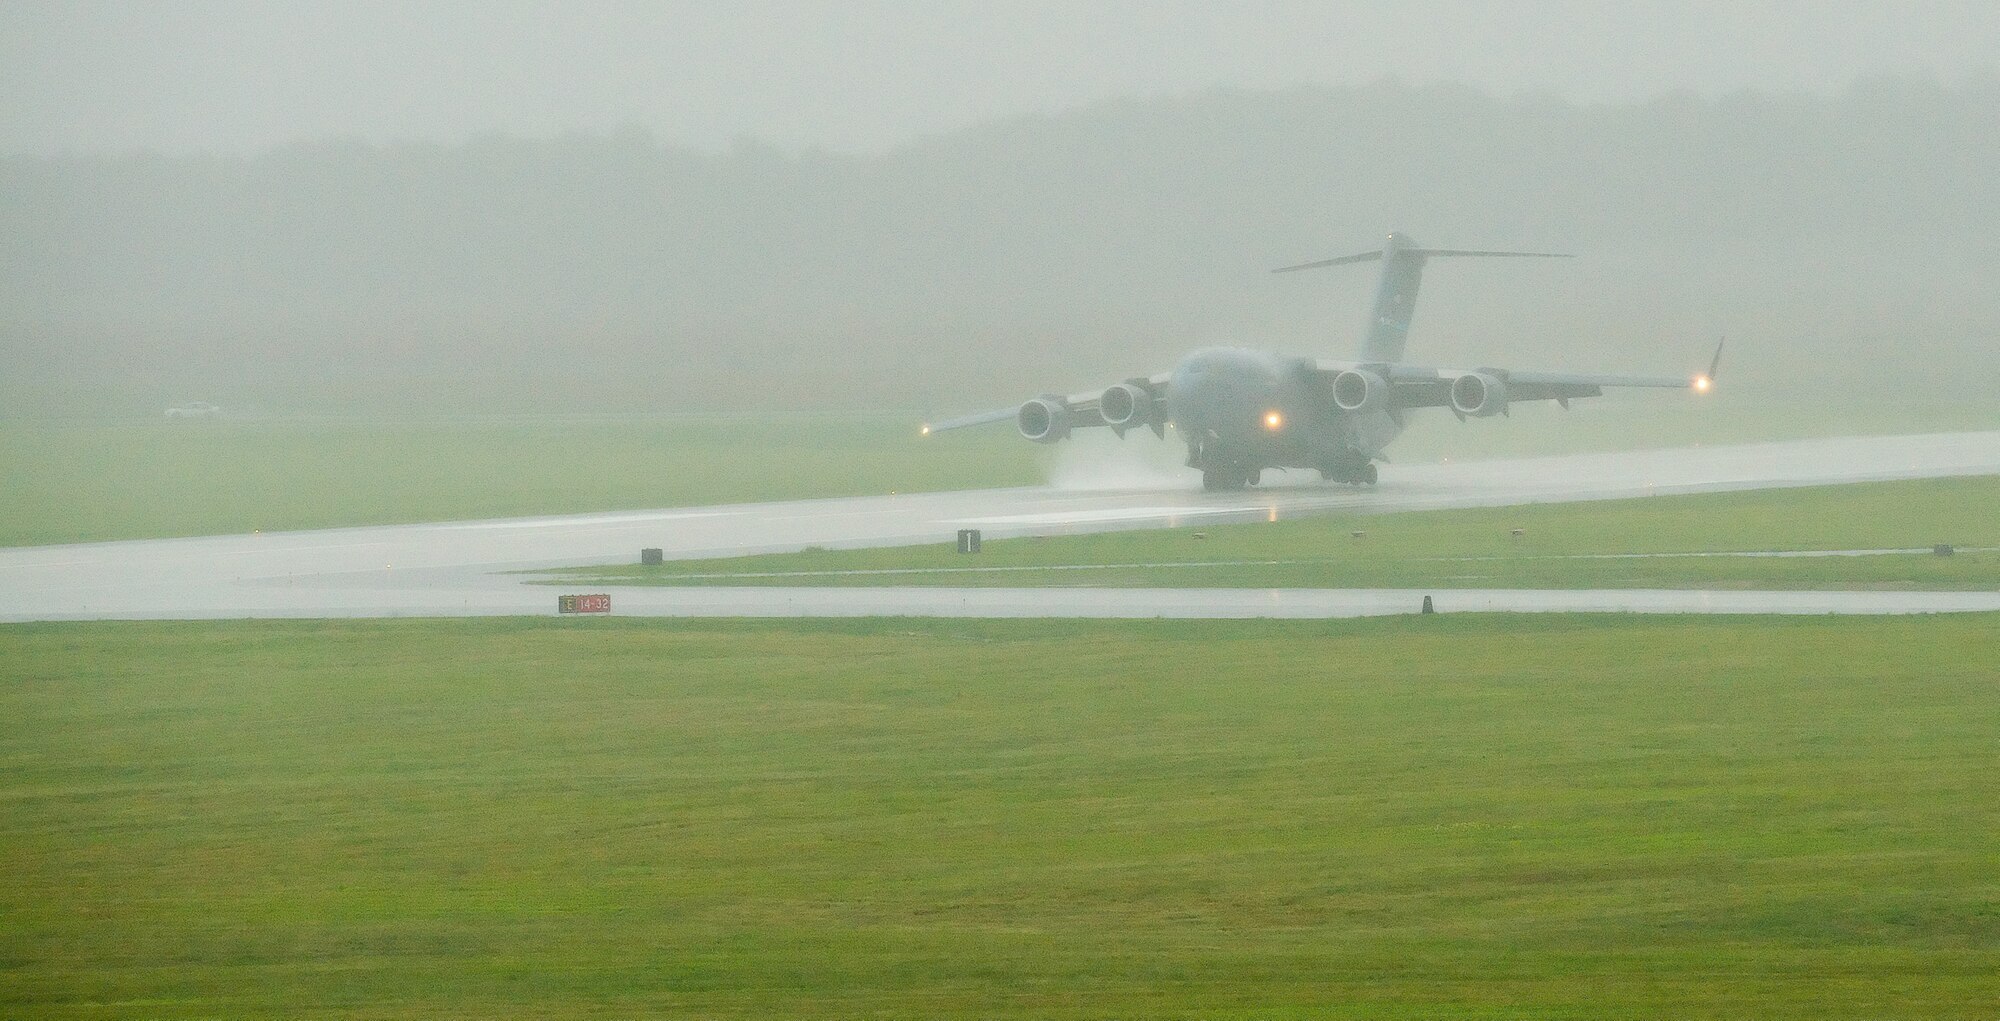 A C-17 Globemaster III, piloted by Col. Manson Morris, 436th Airlift Wing commander, lands on runway 14/32 at Dover Air Force Base, Del., June 5. Colonel Morris piloted the inaugural flight to utilize the newly reconstructed runway, which was turned over from the contractor to base officials June 5. (U.S. Air Force photo/Jason Minto) 